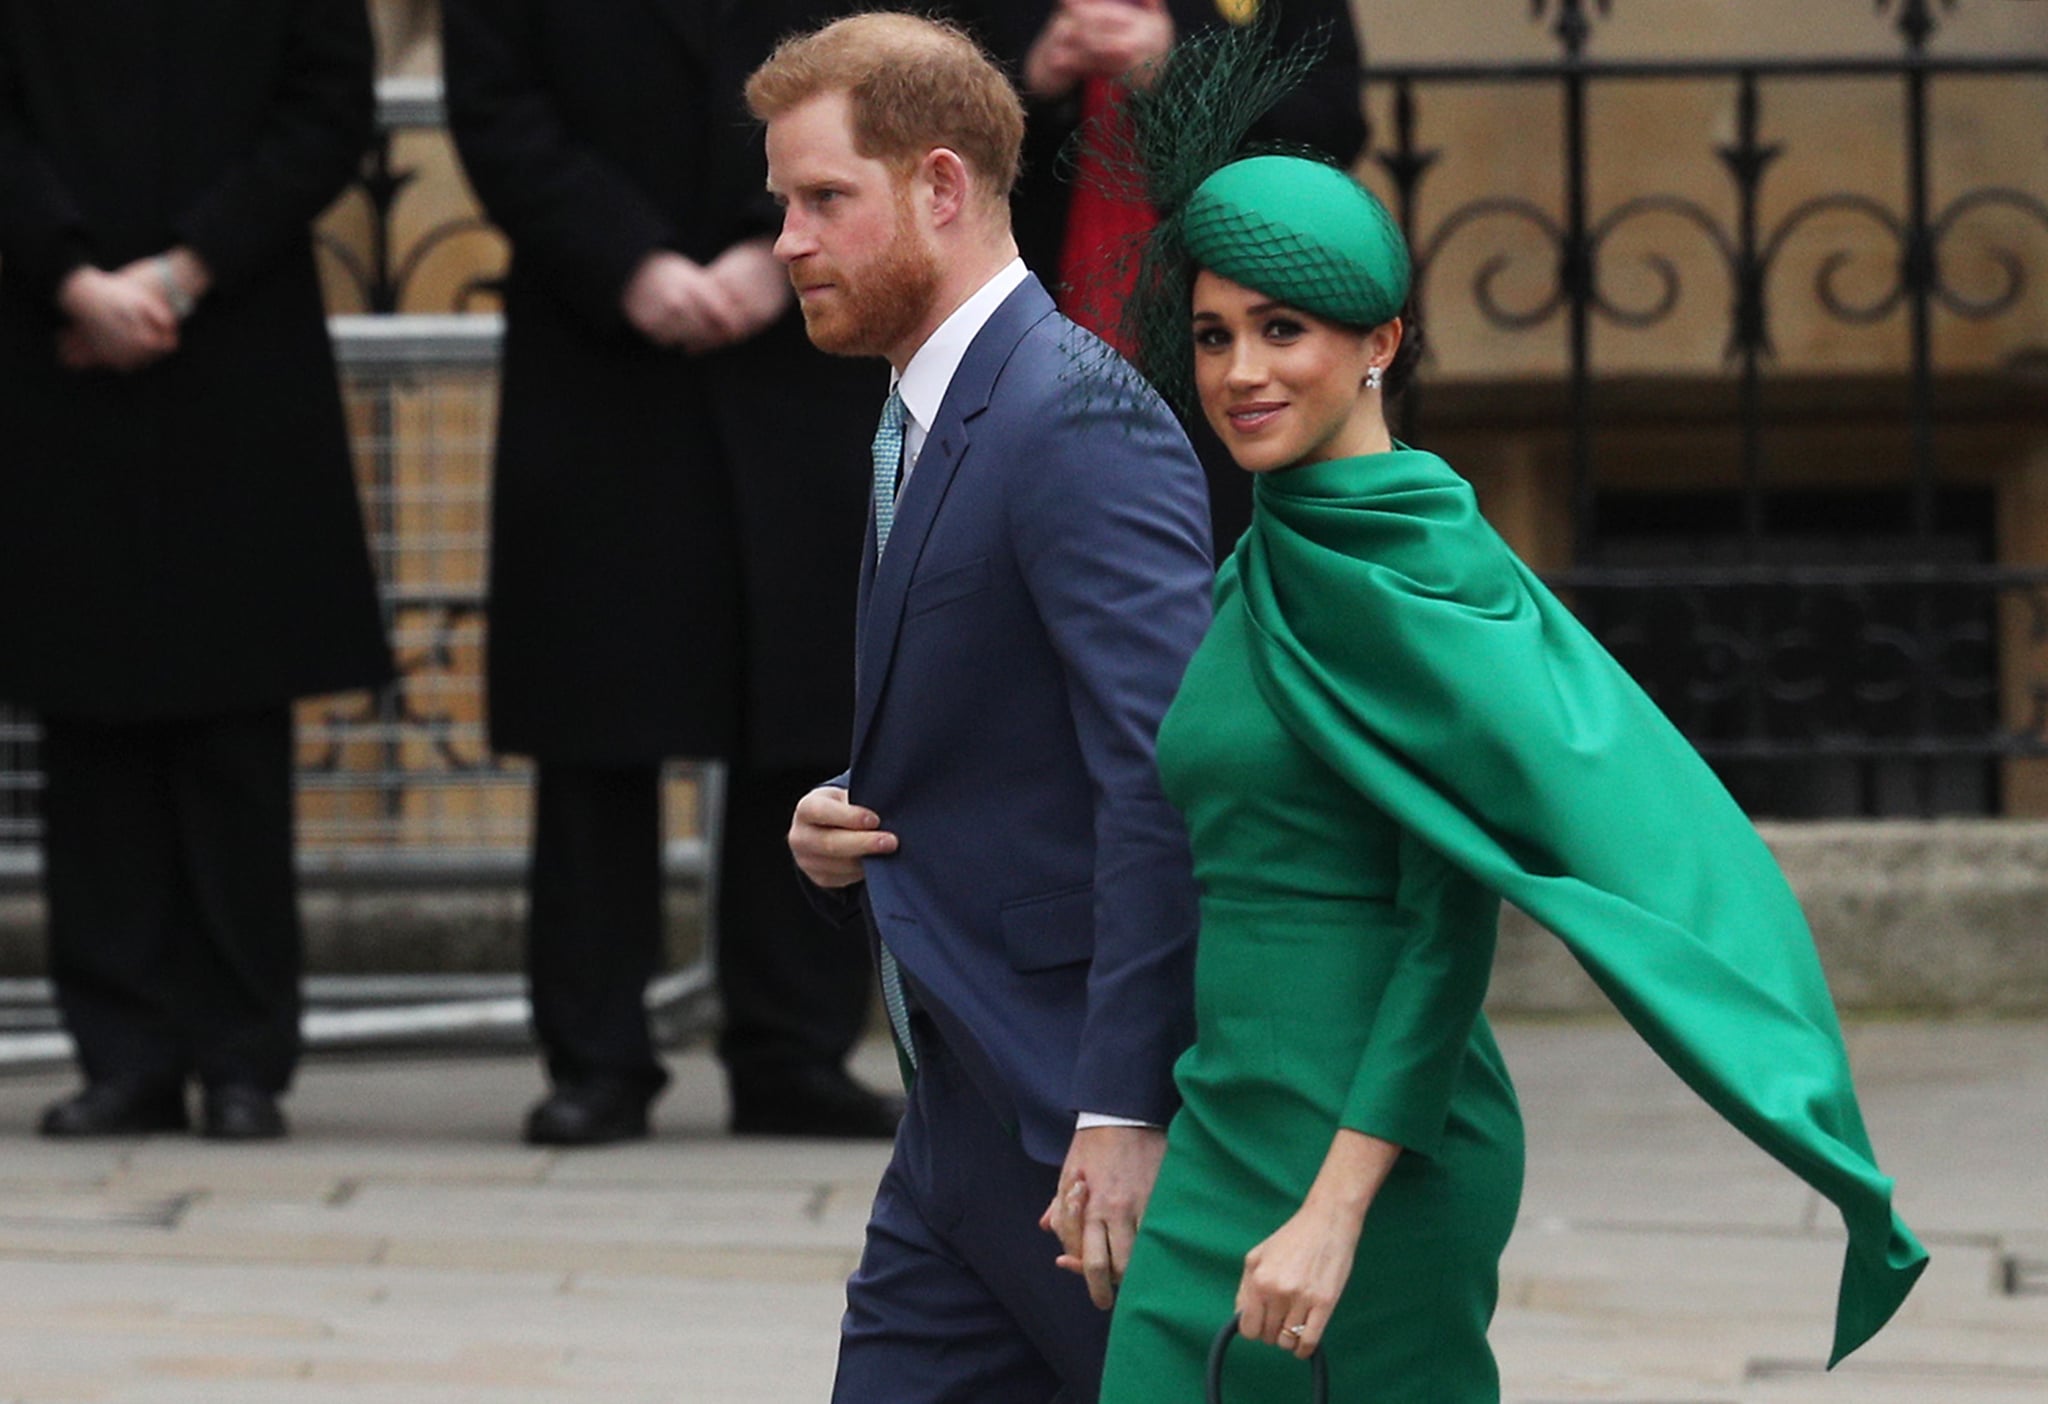 LONDON, ENGLAND - MARCH 9: Prince Harry, Duke of Sussex (L) and Meghan, Duchess of Sussex arrive to attend the annual Commonwealth Day service at Westminster Abbey on March 9, 2020 in London, England.  (Photo by Dan Kitwood/Getty Images)